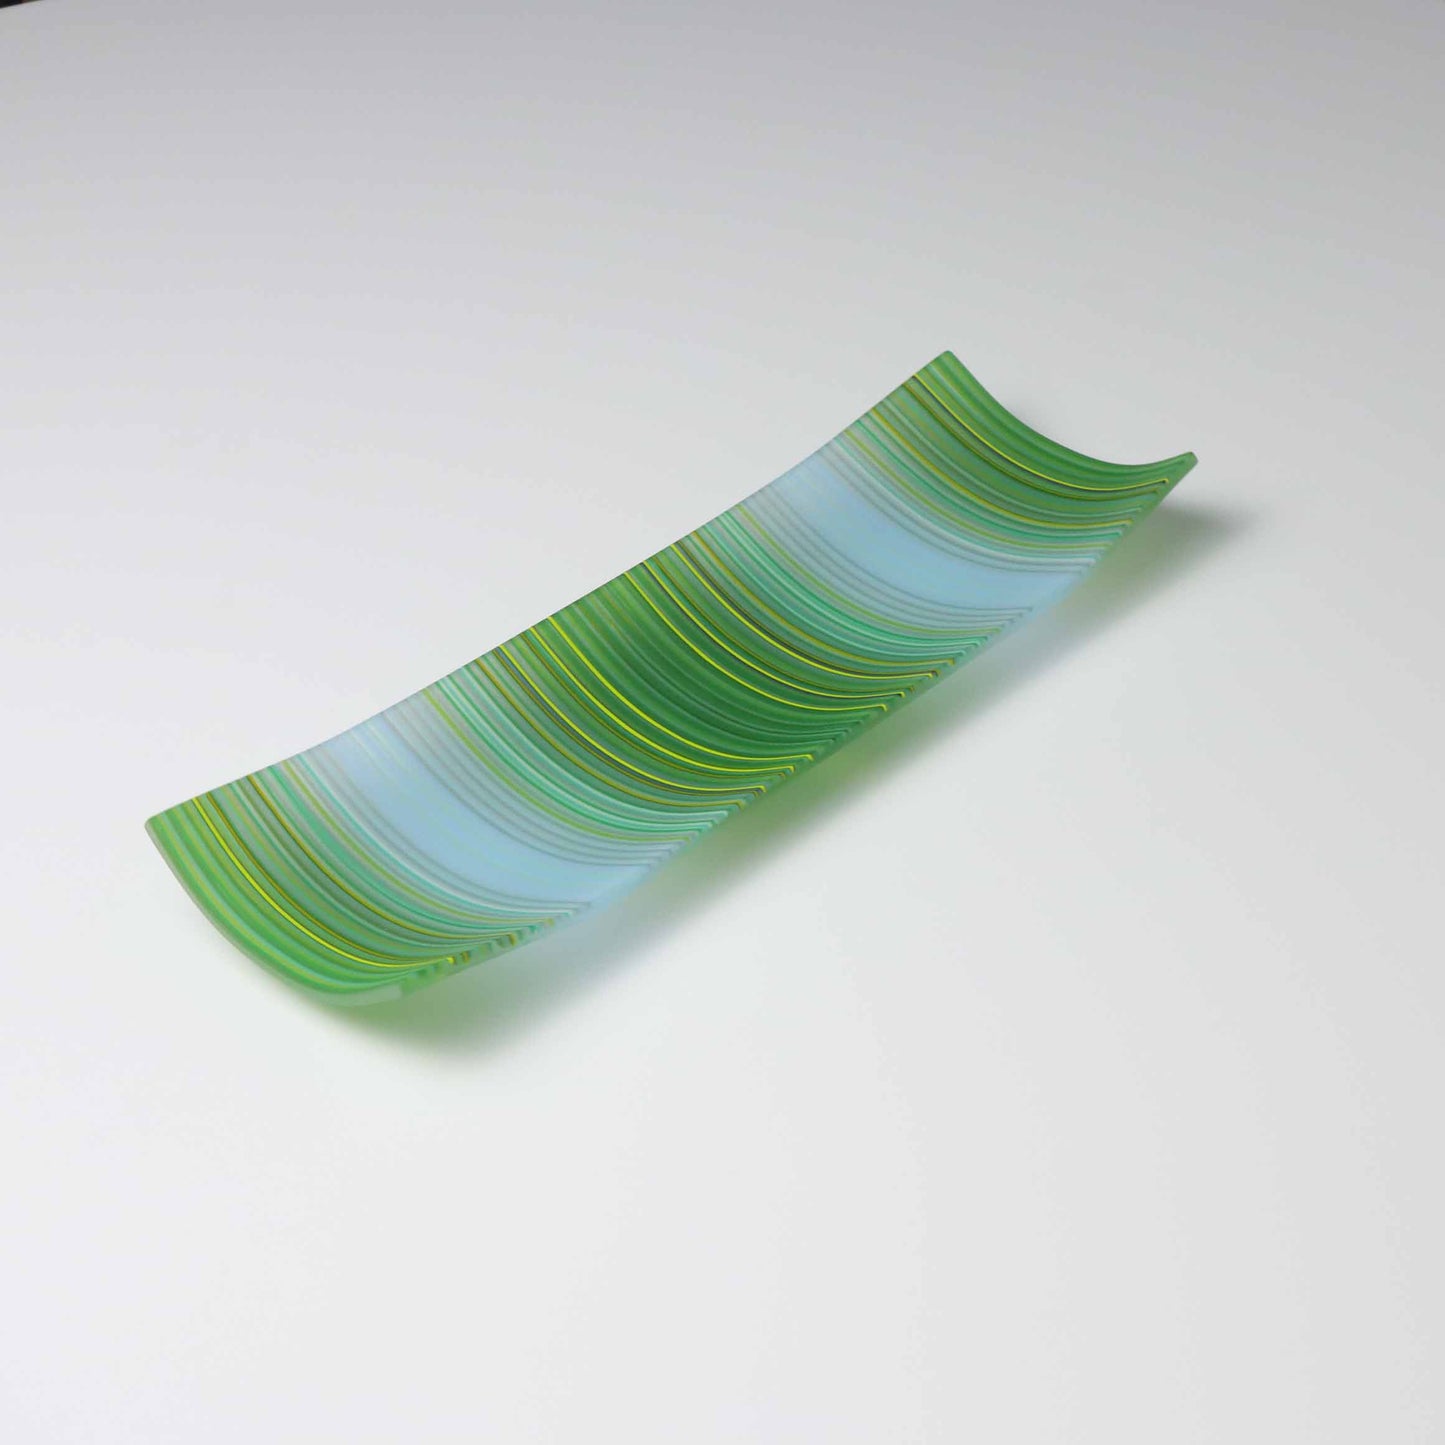 S2179 | Rectangular Shaped ColourWave Glass Plate | Green and Pale Blue